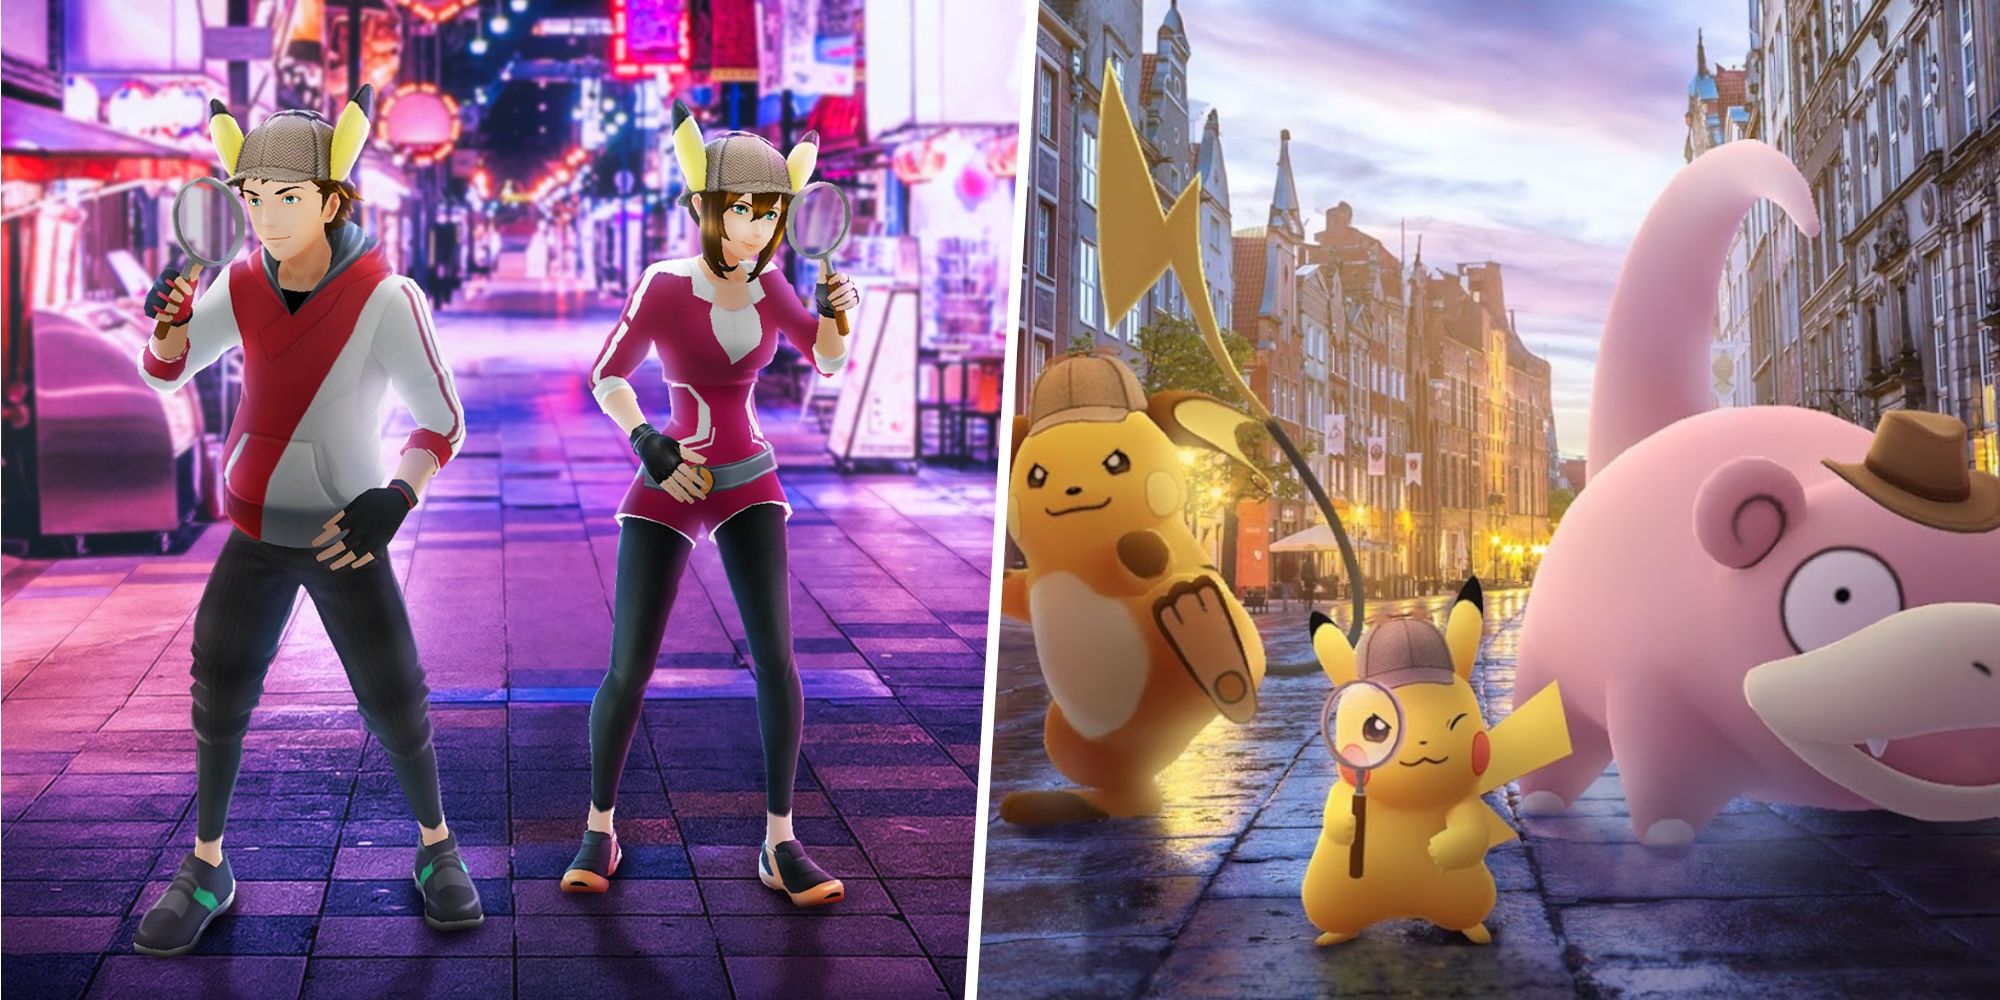 Image of avatars doing the Detective Pikachu Pose split with an image of Pikachu, Raichu, and Slowpoke in hats